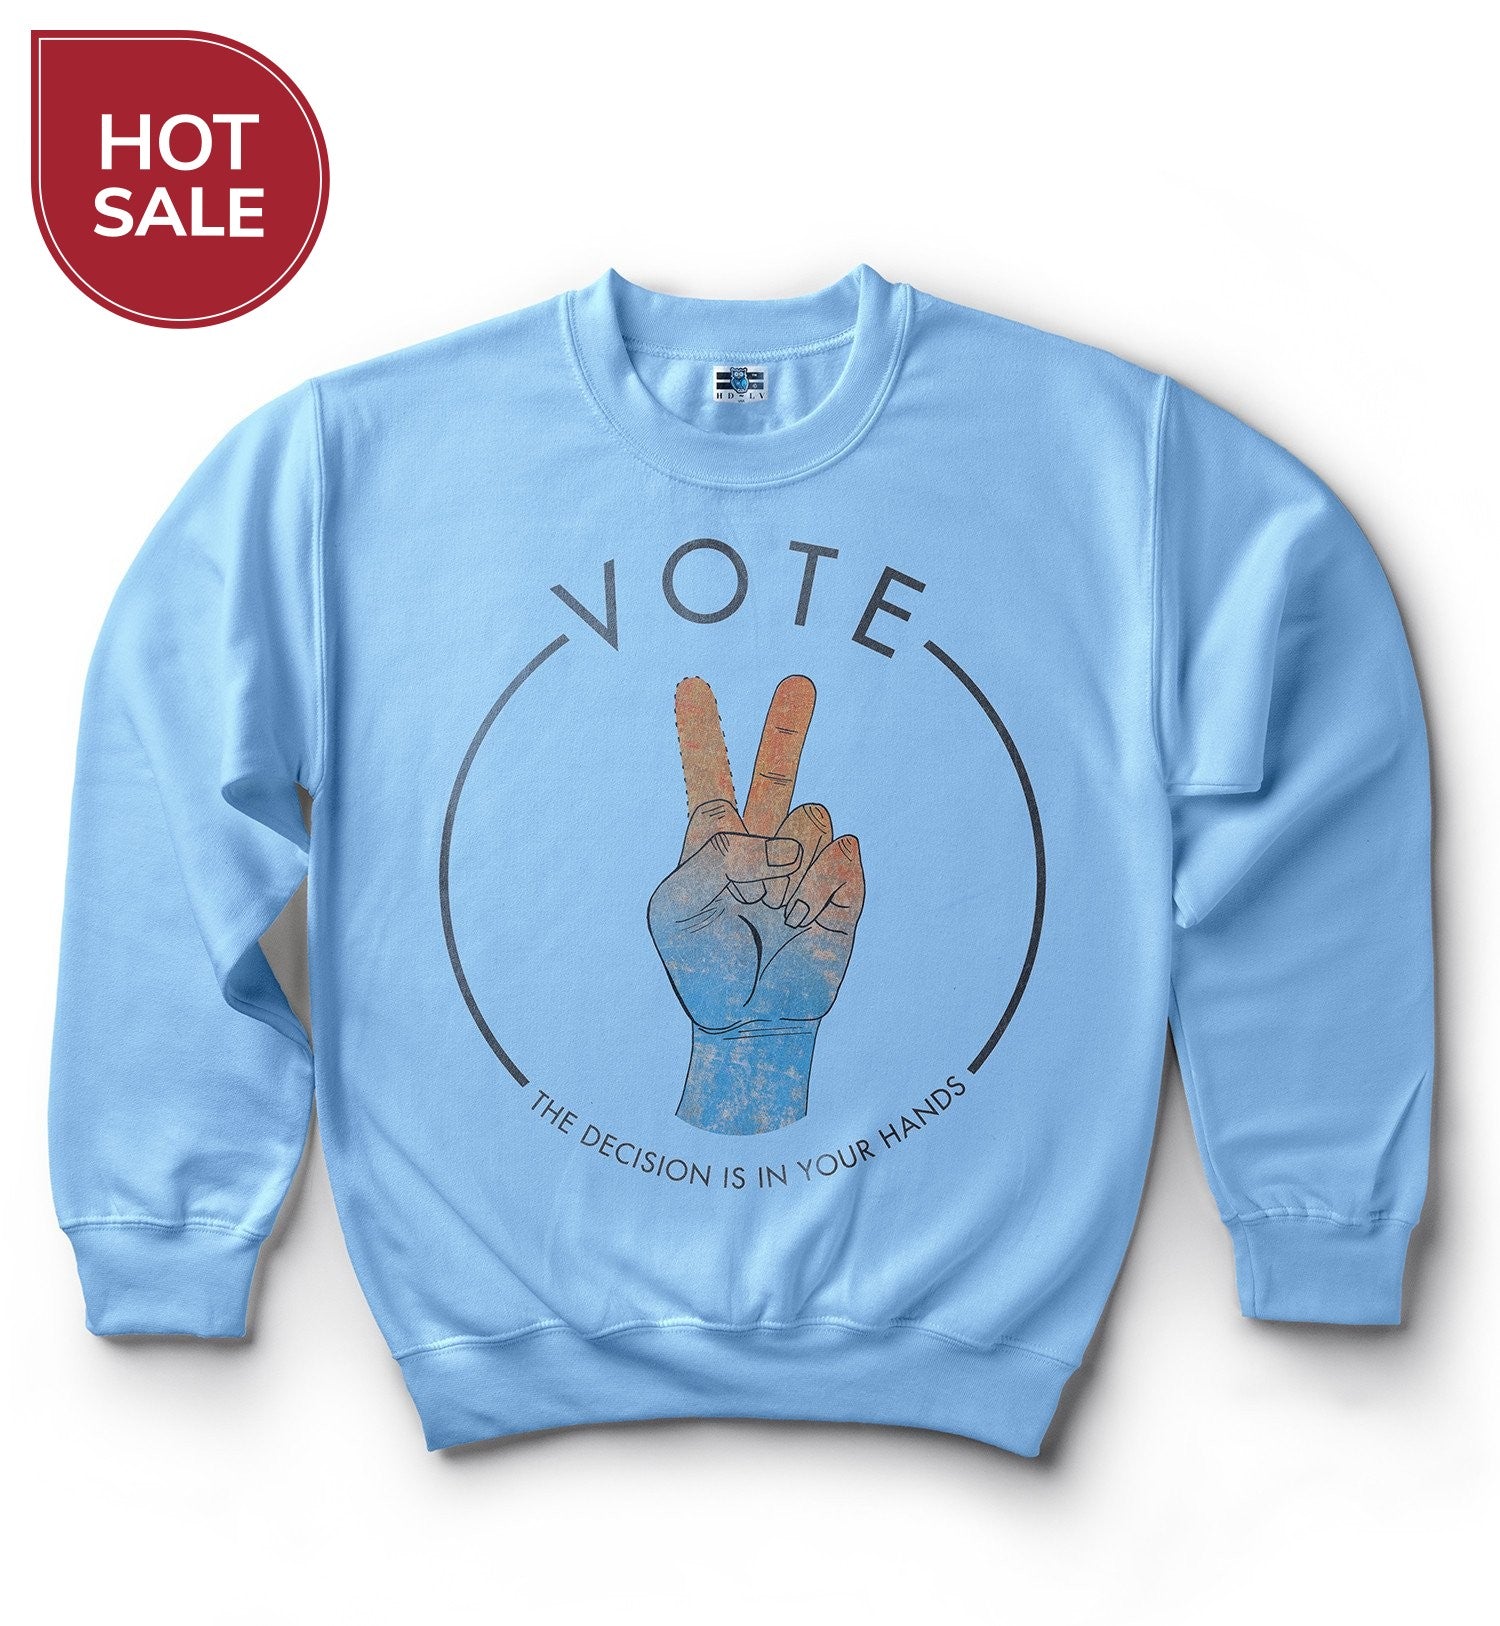 Shop and Buy Vote Shirts and Pop Culture Clothes